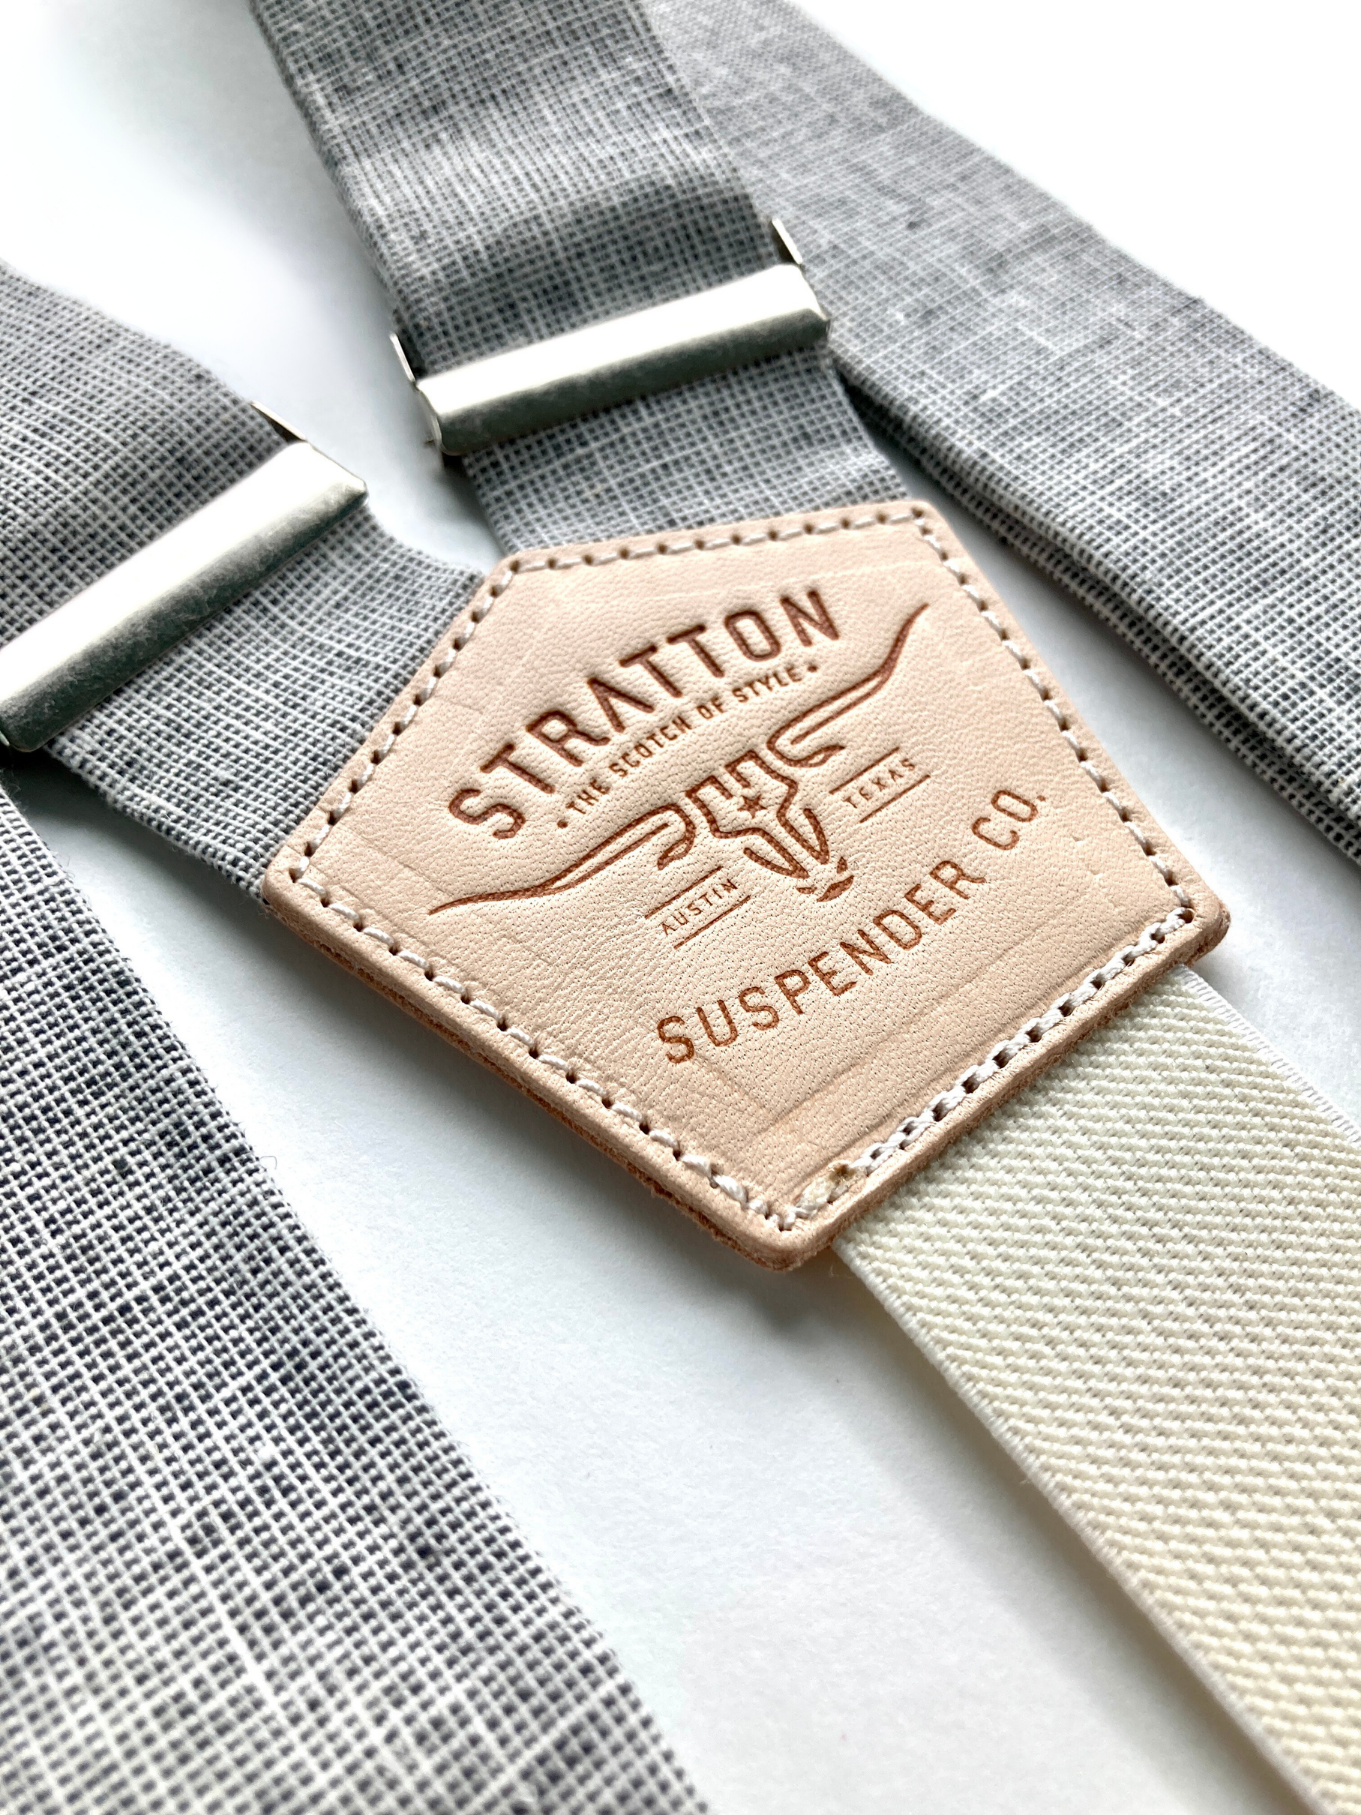 Roasted Pecan Linen Button on Suspenders Set - Spring Collection Stratton Suspender Co. Tan